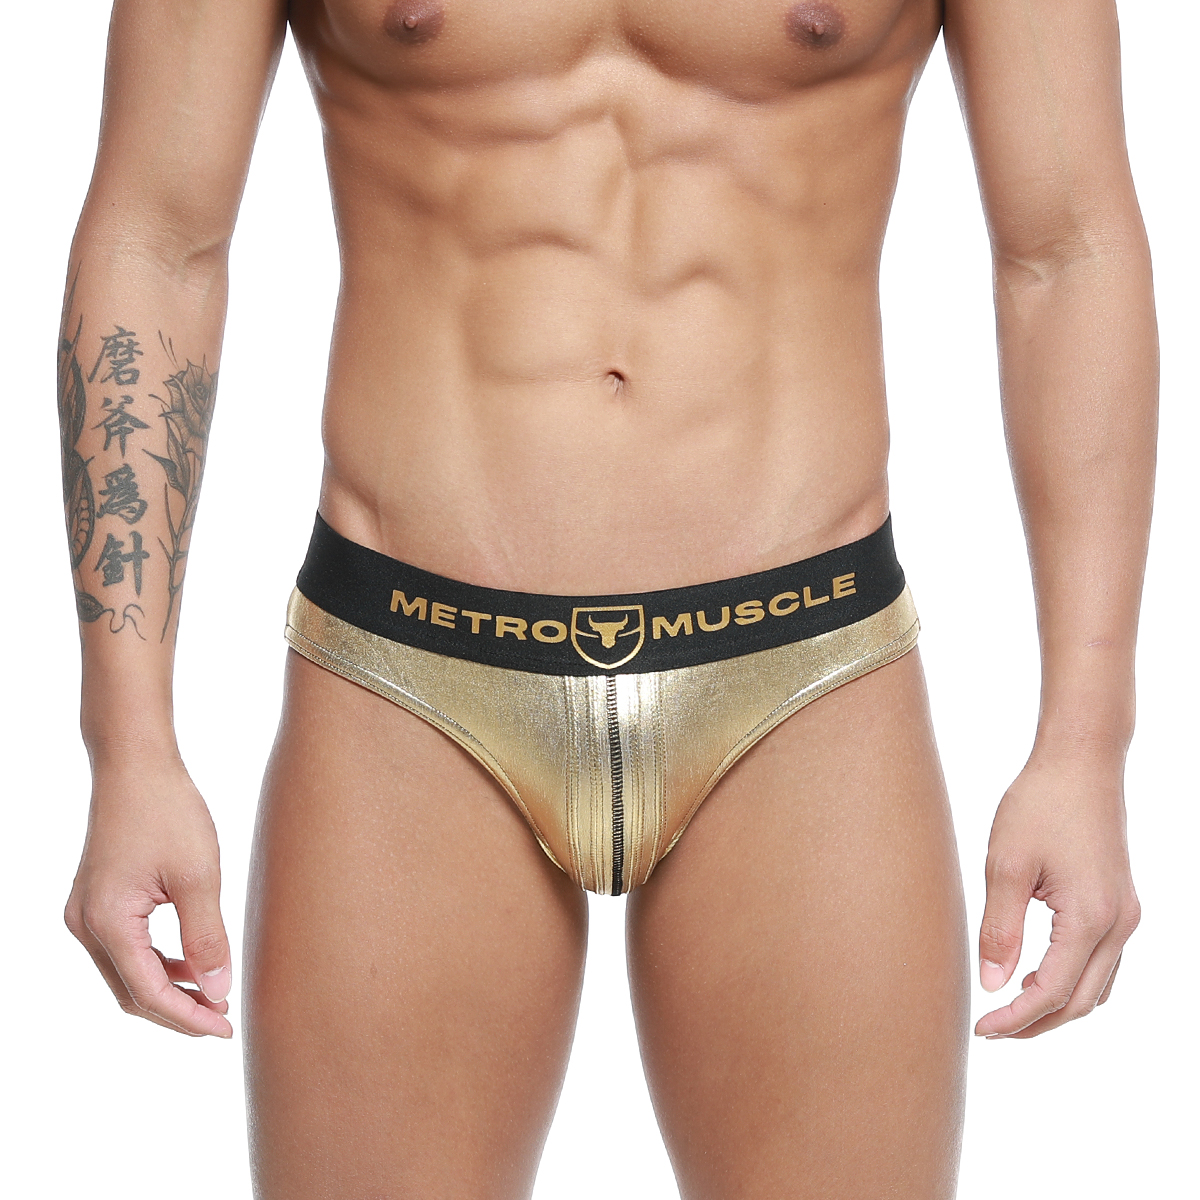 [MetroMuscleWear] Sierra Competition Suit Gold (4974-86)